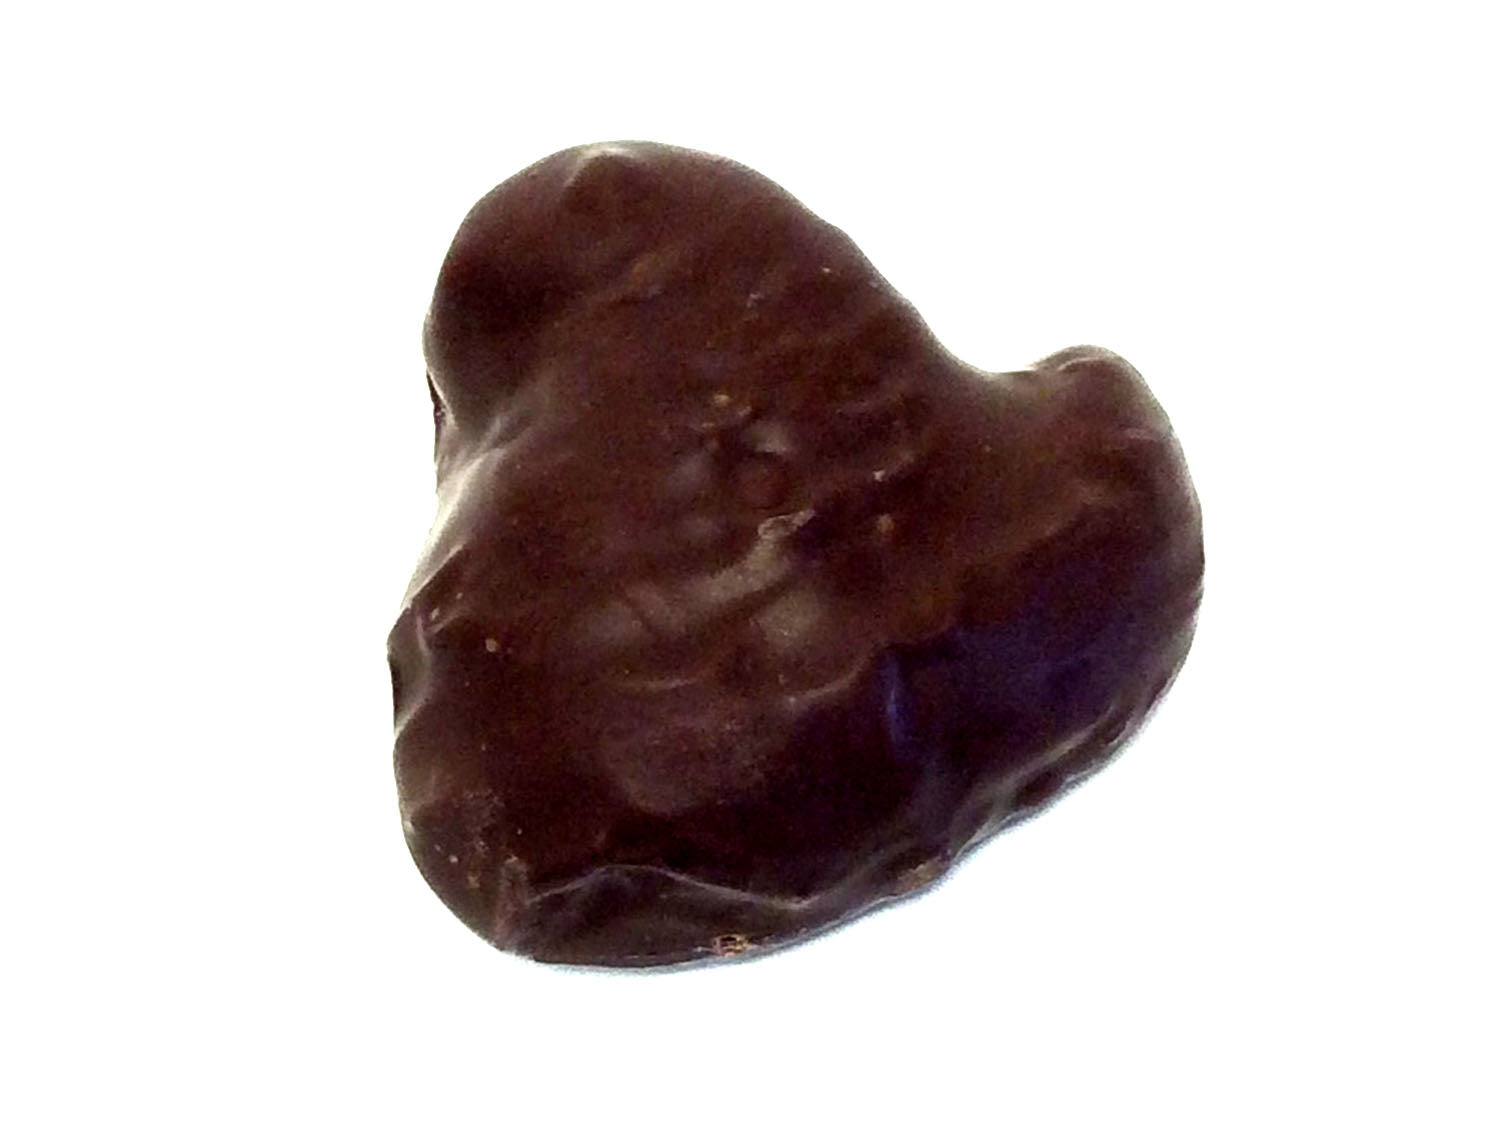 PEEPS Chocolate Covered Chick - 1 oz